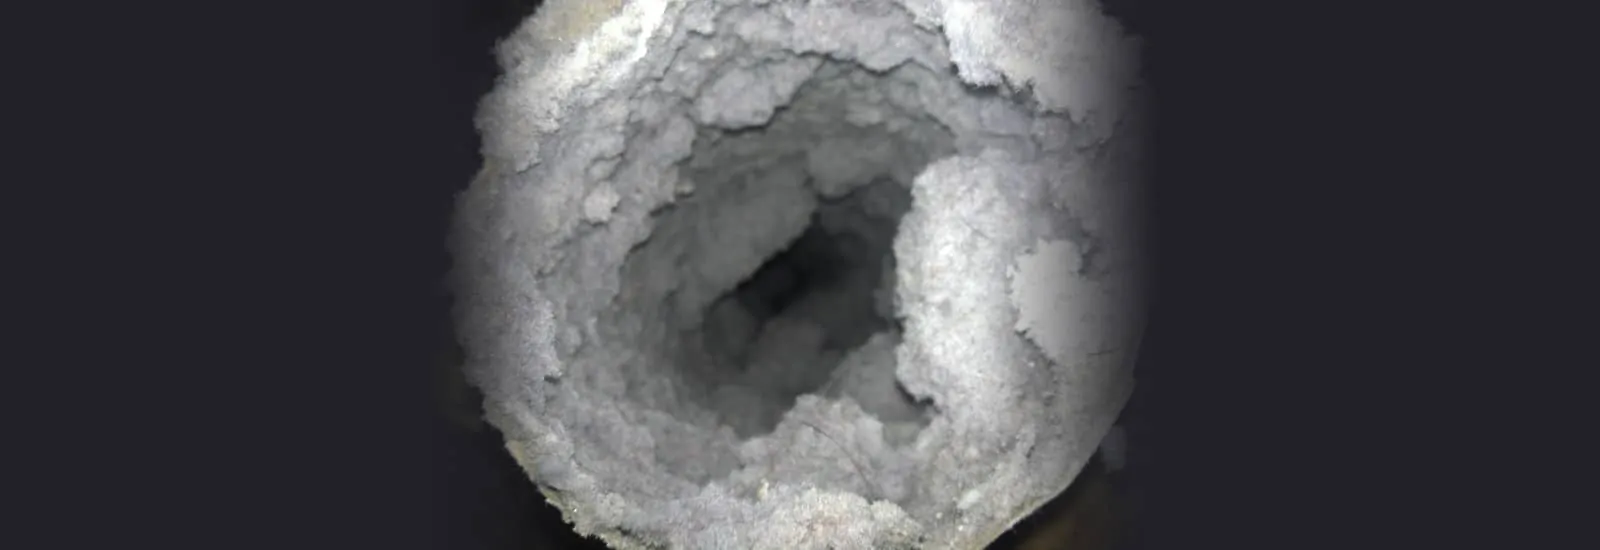 dryer vent cleaning service